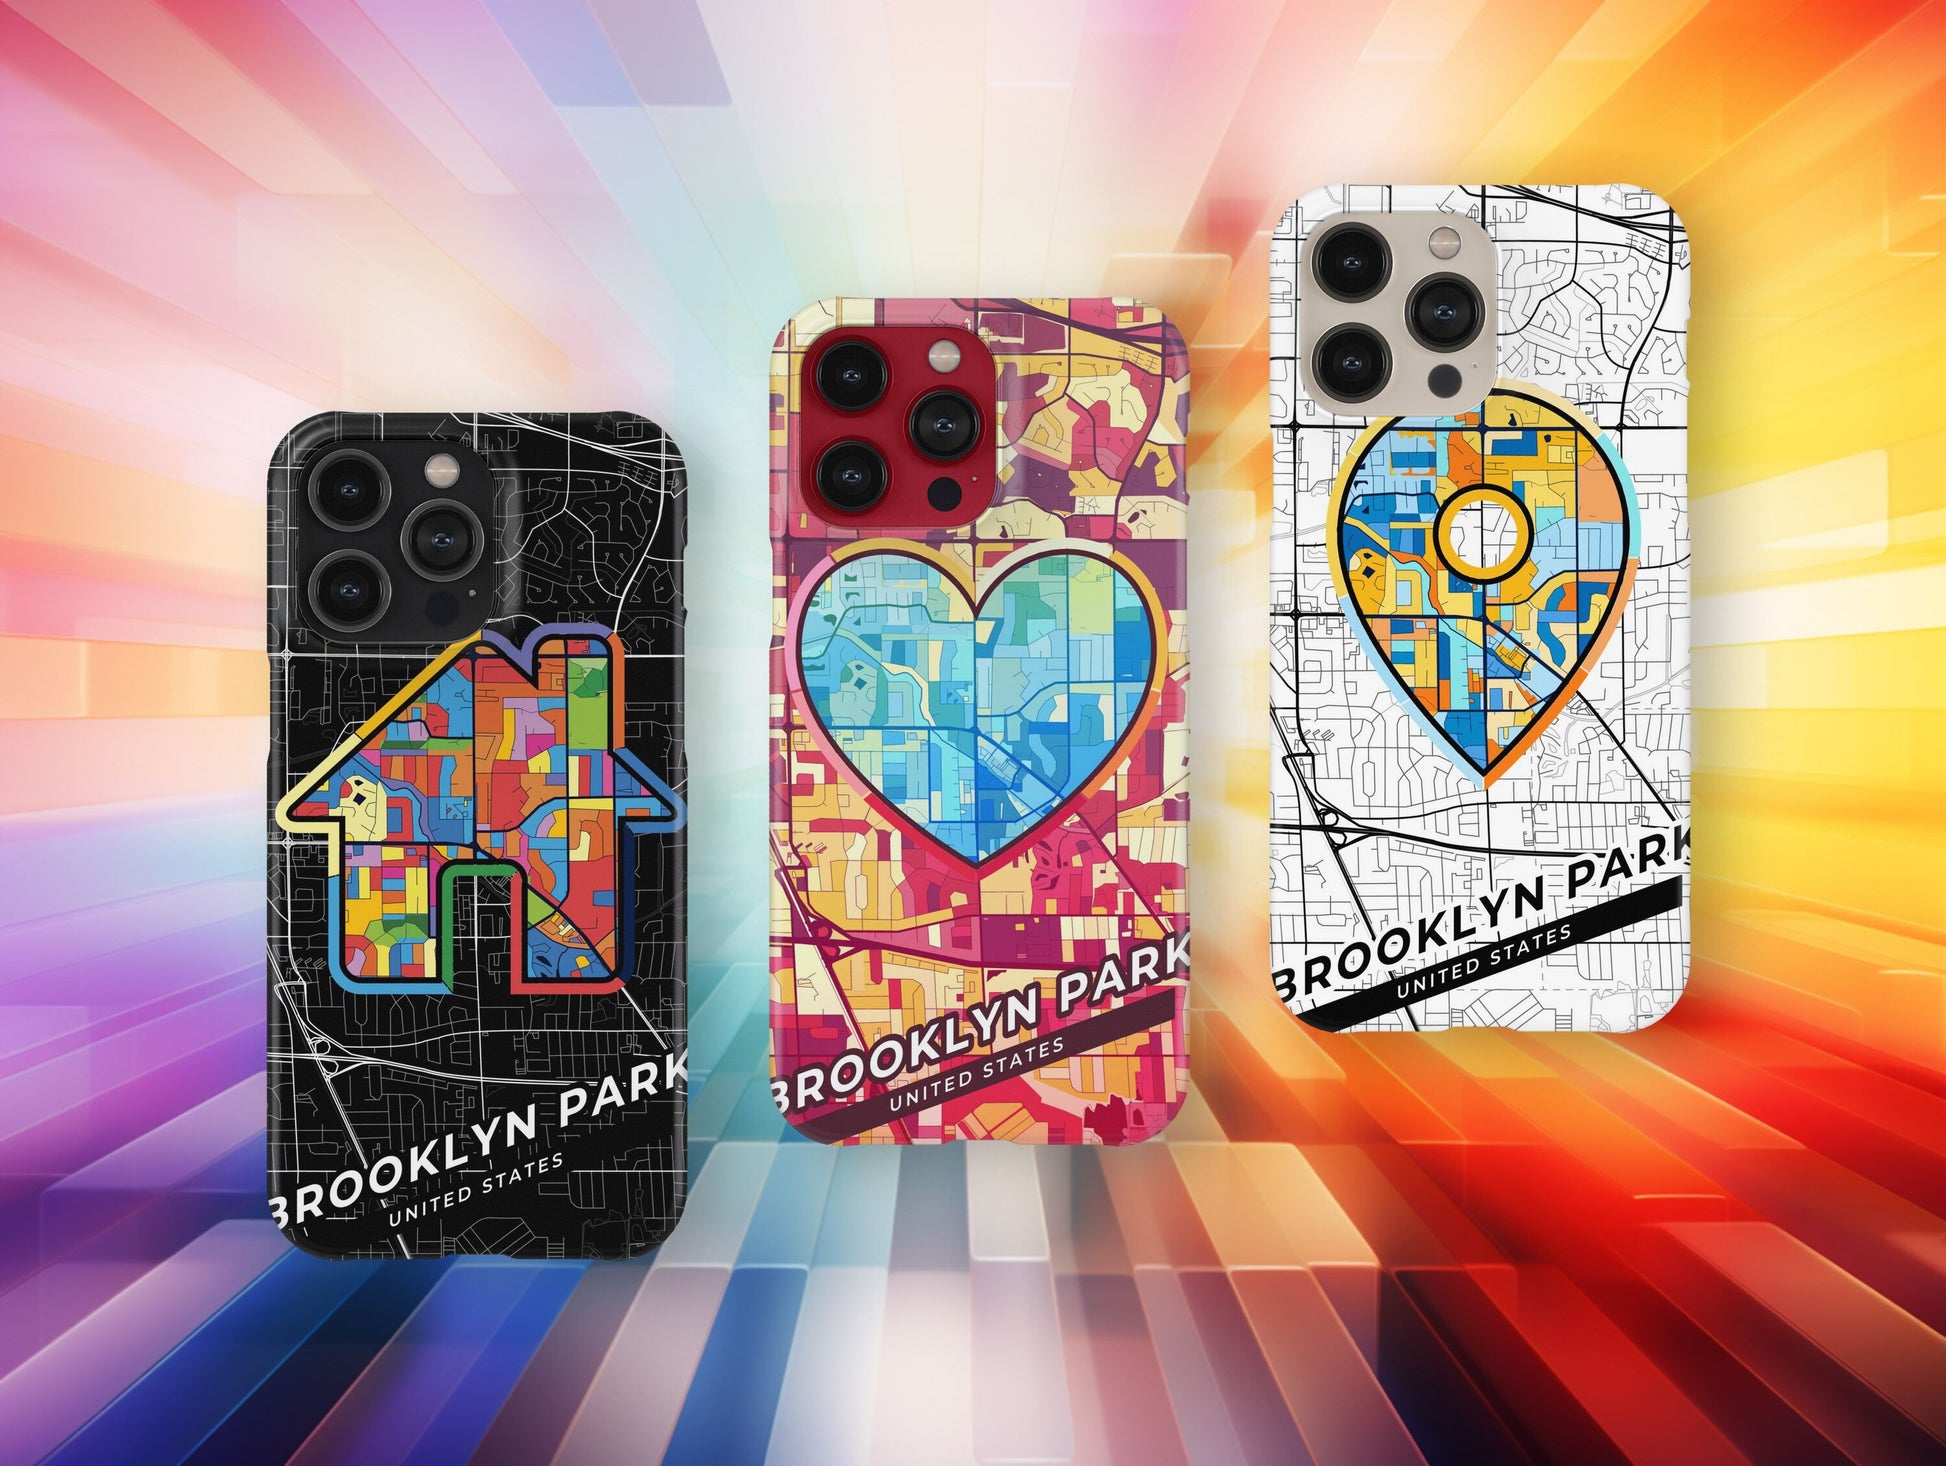 Brooklyn Park Minnesota slim phone case with colorful icon. Birthday, wedding or housewarming gift. Couple match cases.